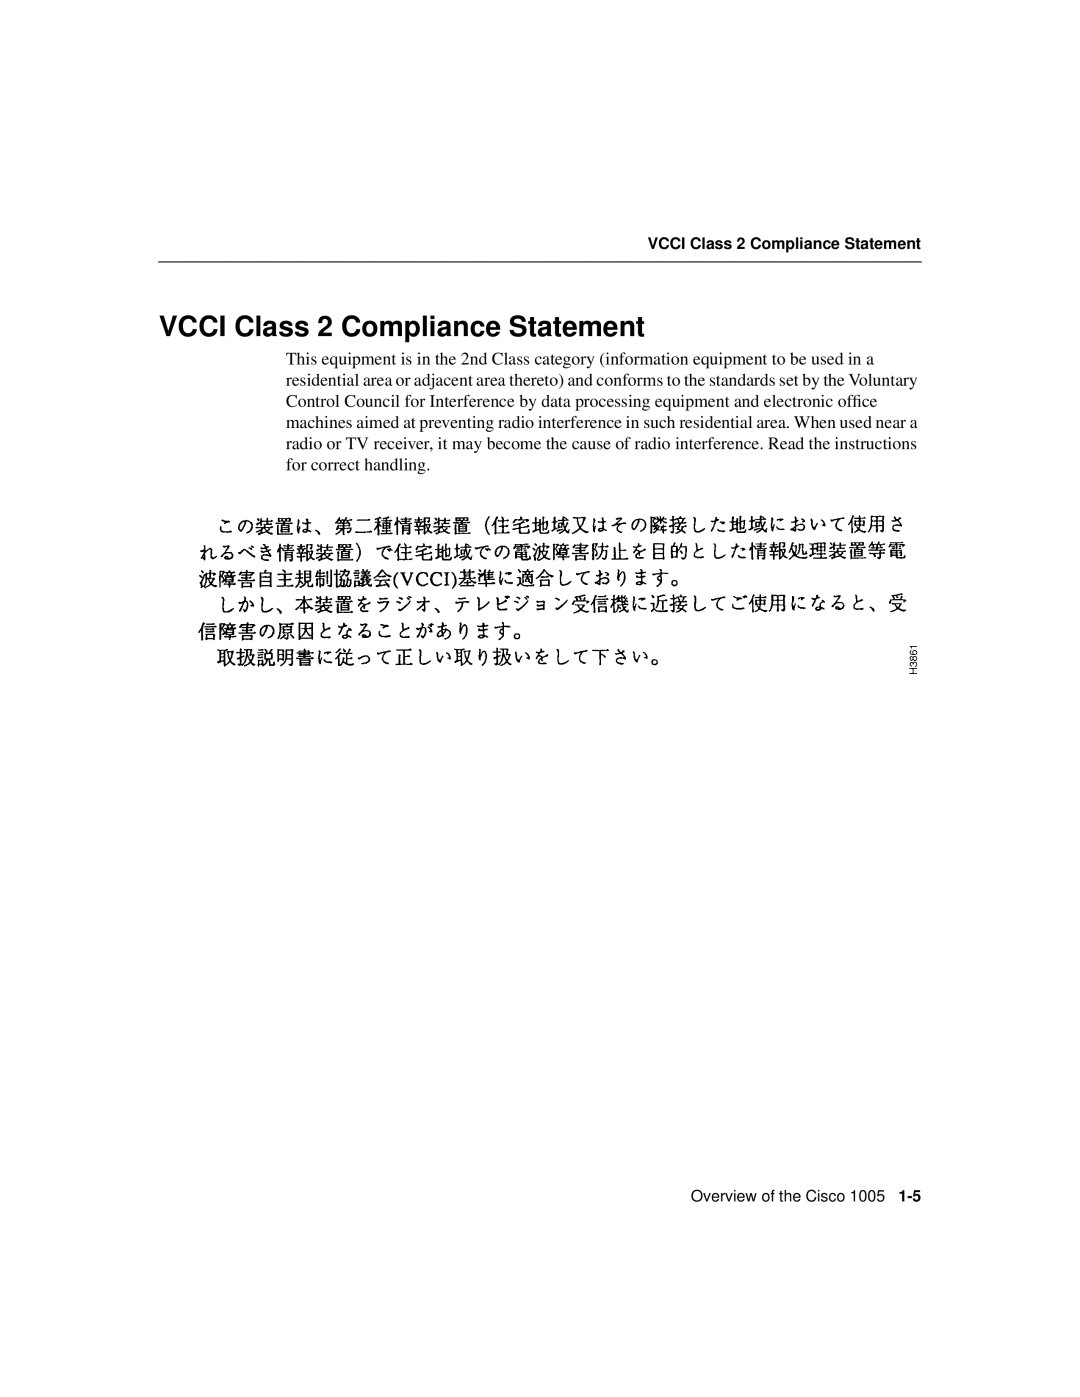 Cisco Systems 1005 manual VCCI Class 2 Compliance Statement 